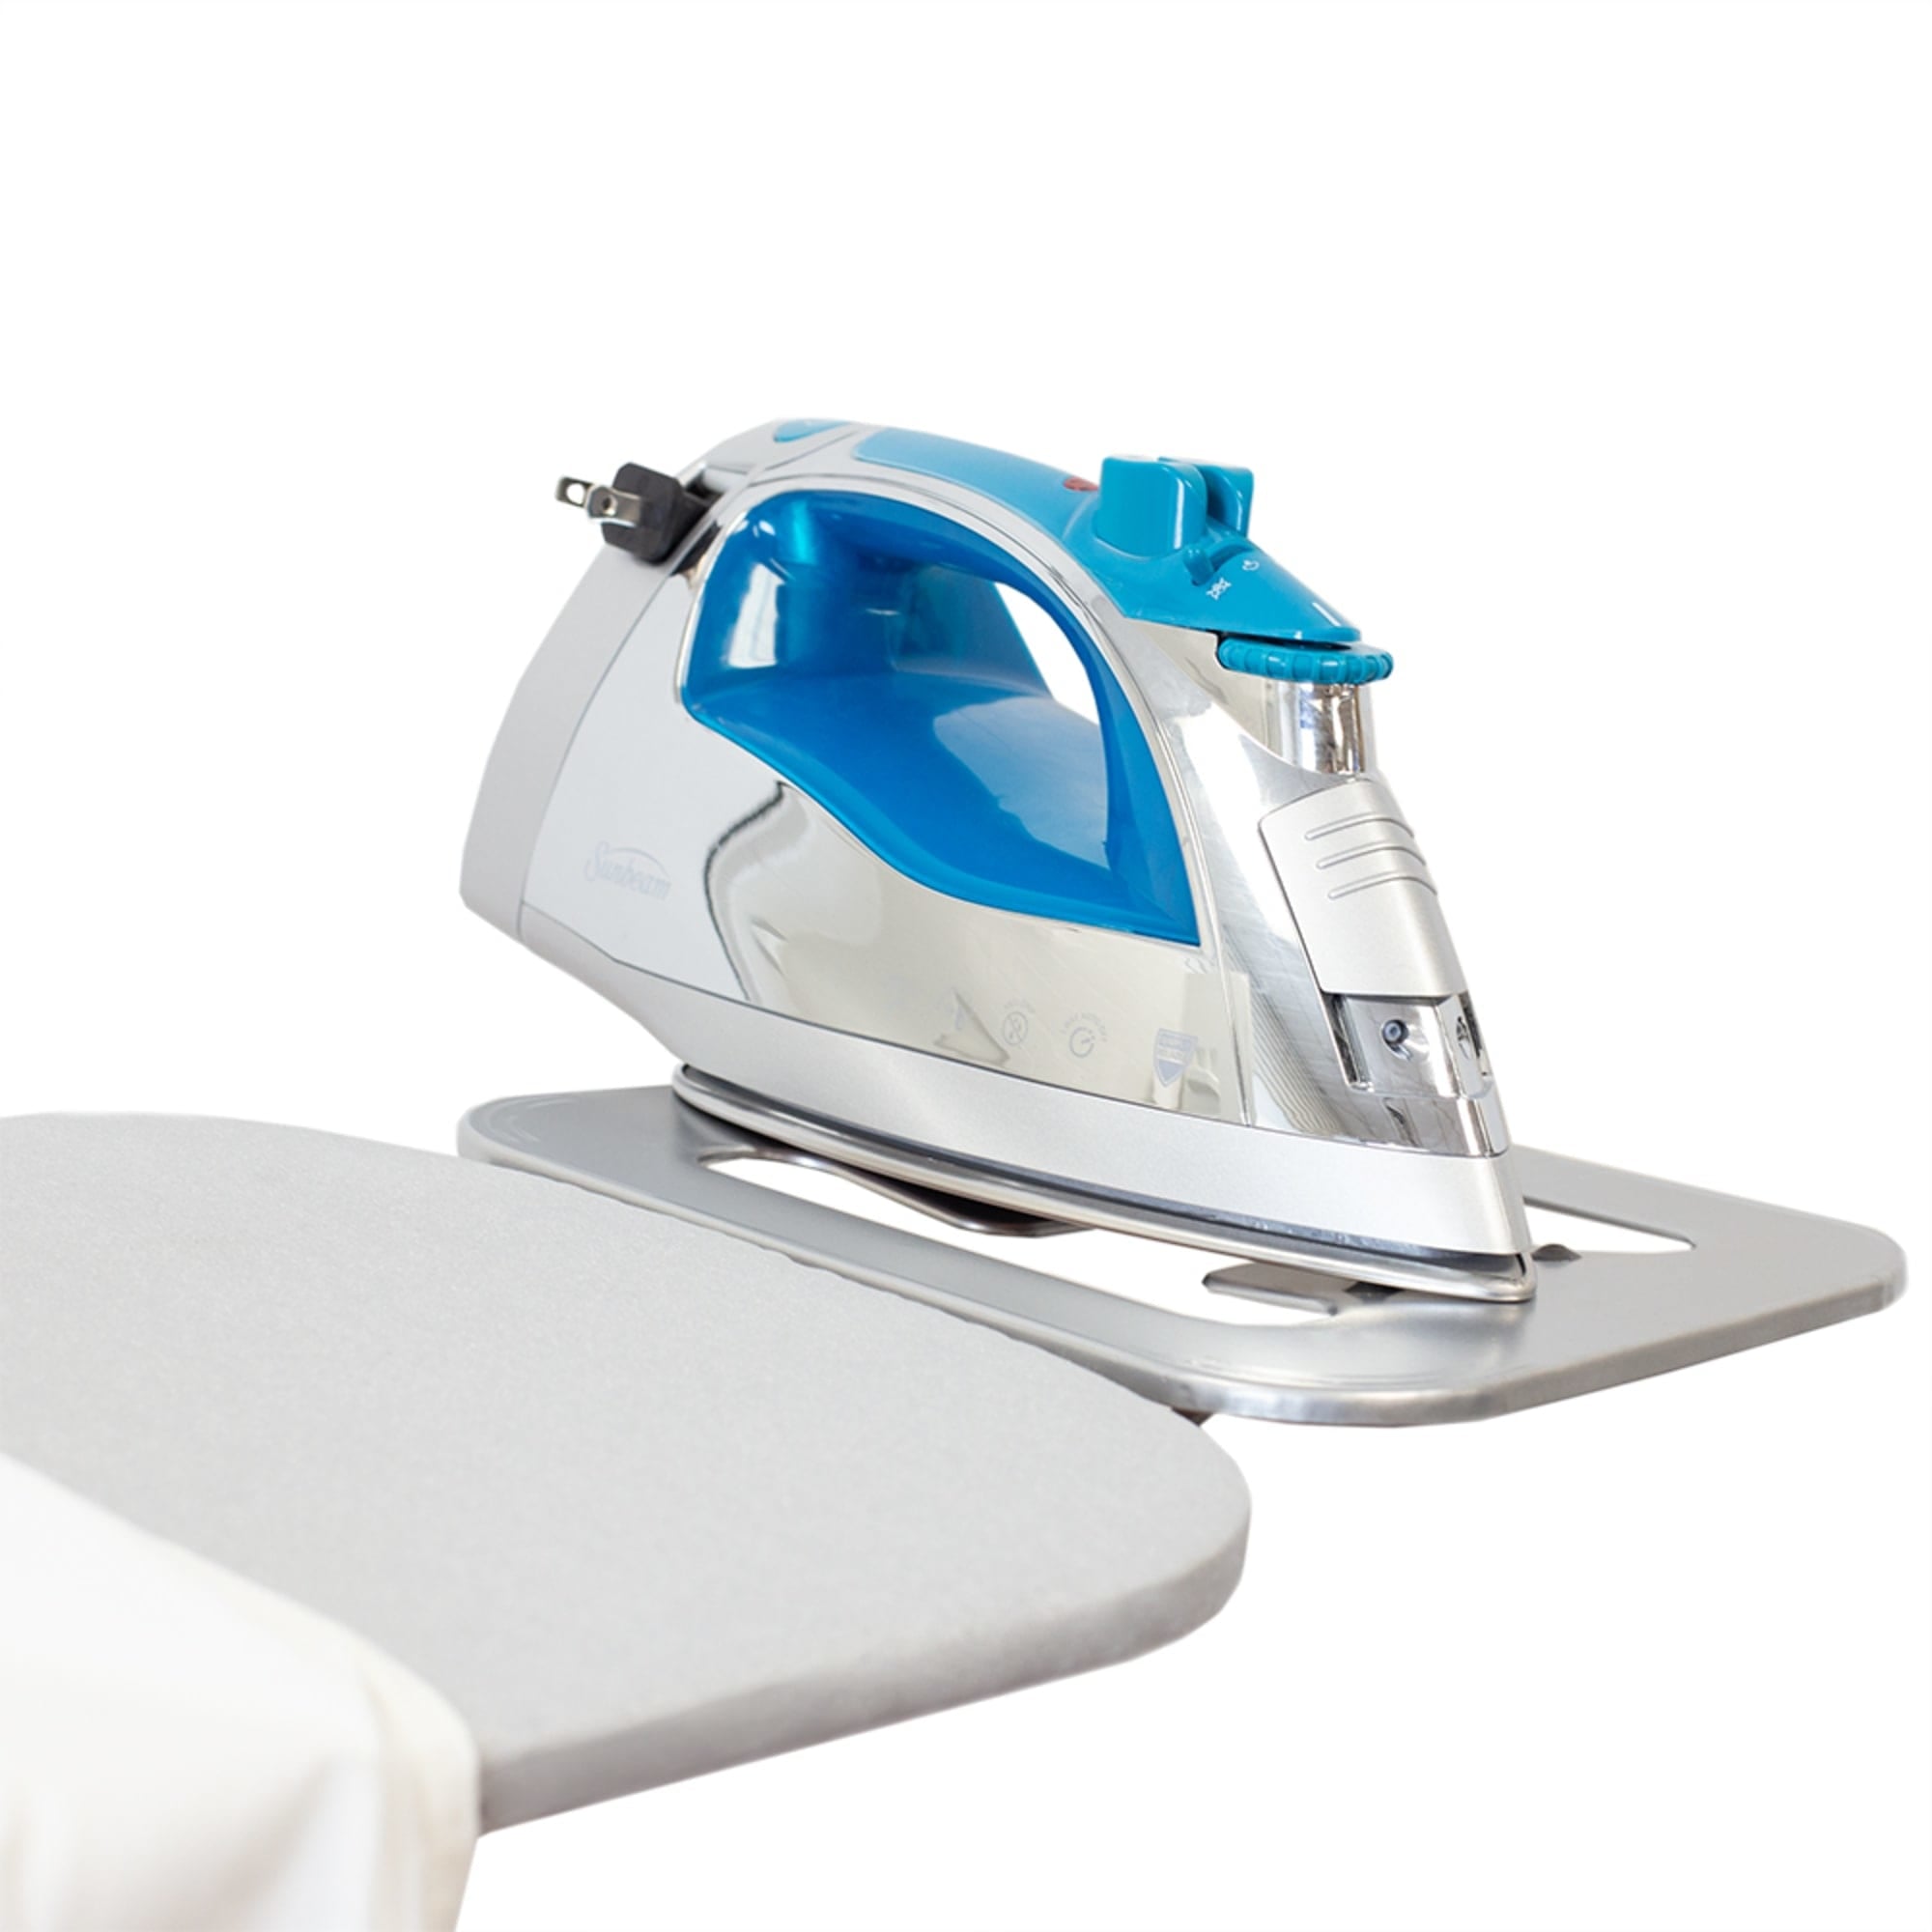 Home Basics  T-Leg Ironing Board with Iron Rest and Machine Washable Cotton Cover $25 EACH, CASE PACK OF 4